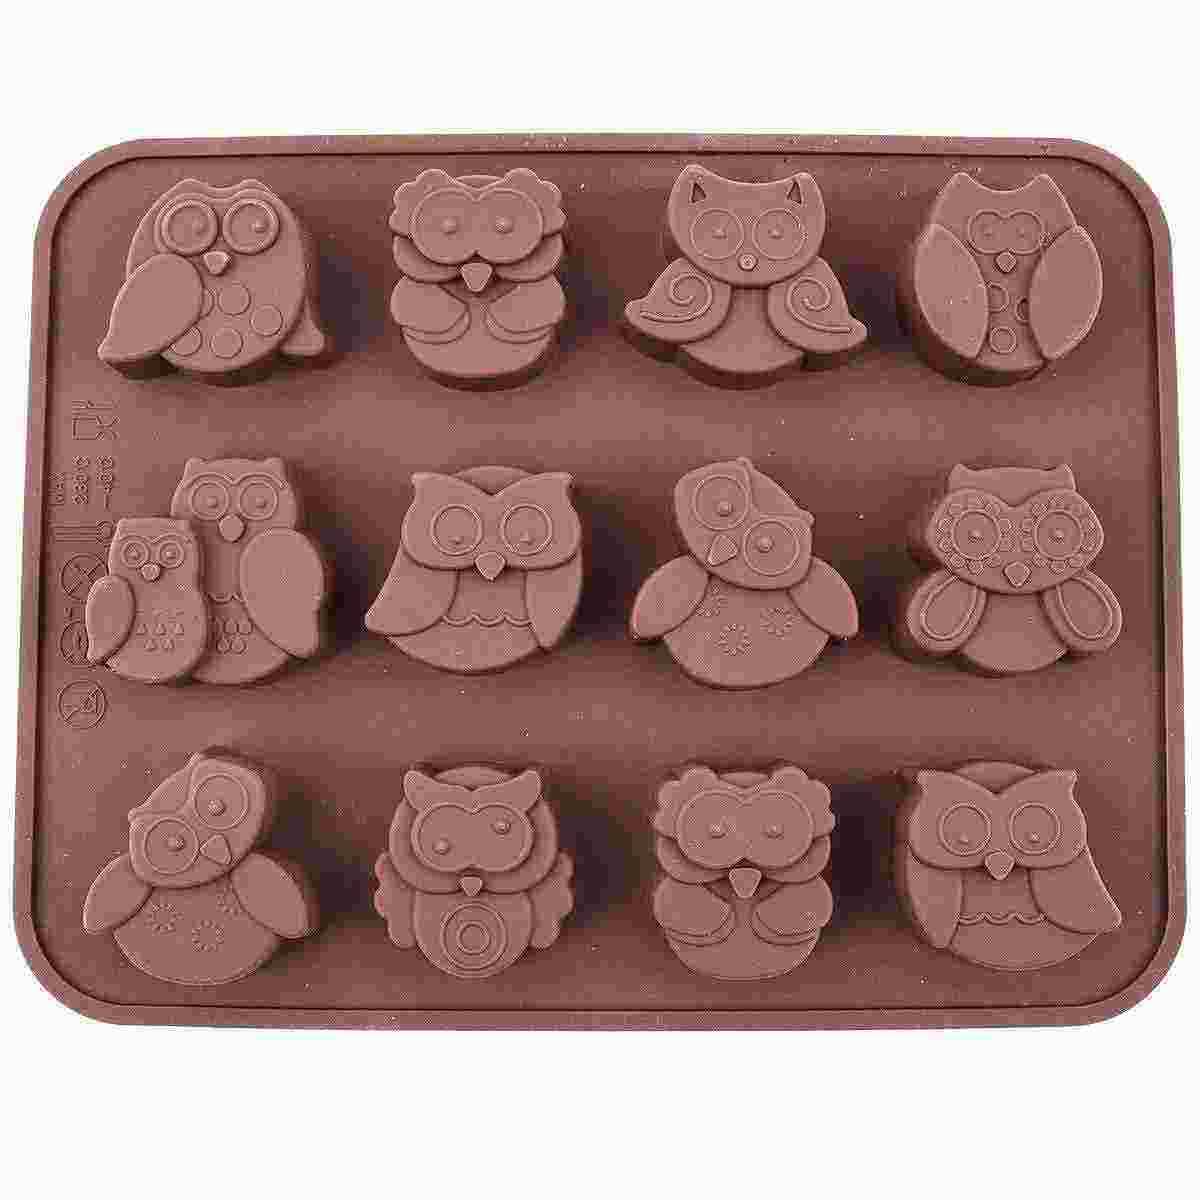 12 Owls Silicone Cake Bread Chocolate Jelly Candy Baking Mould